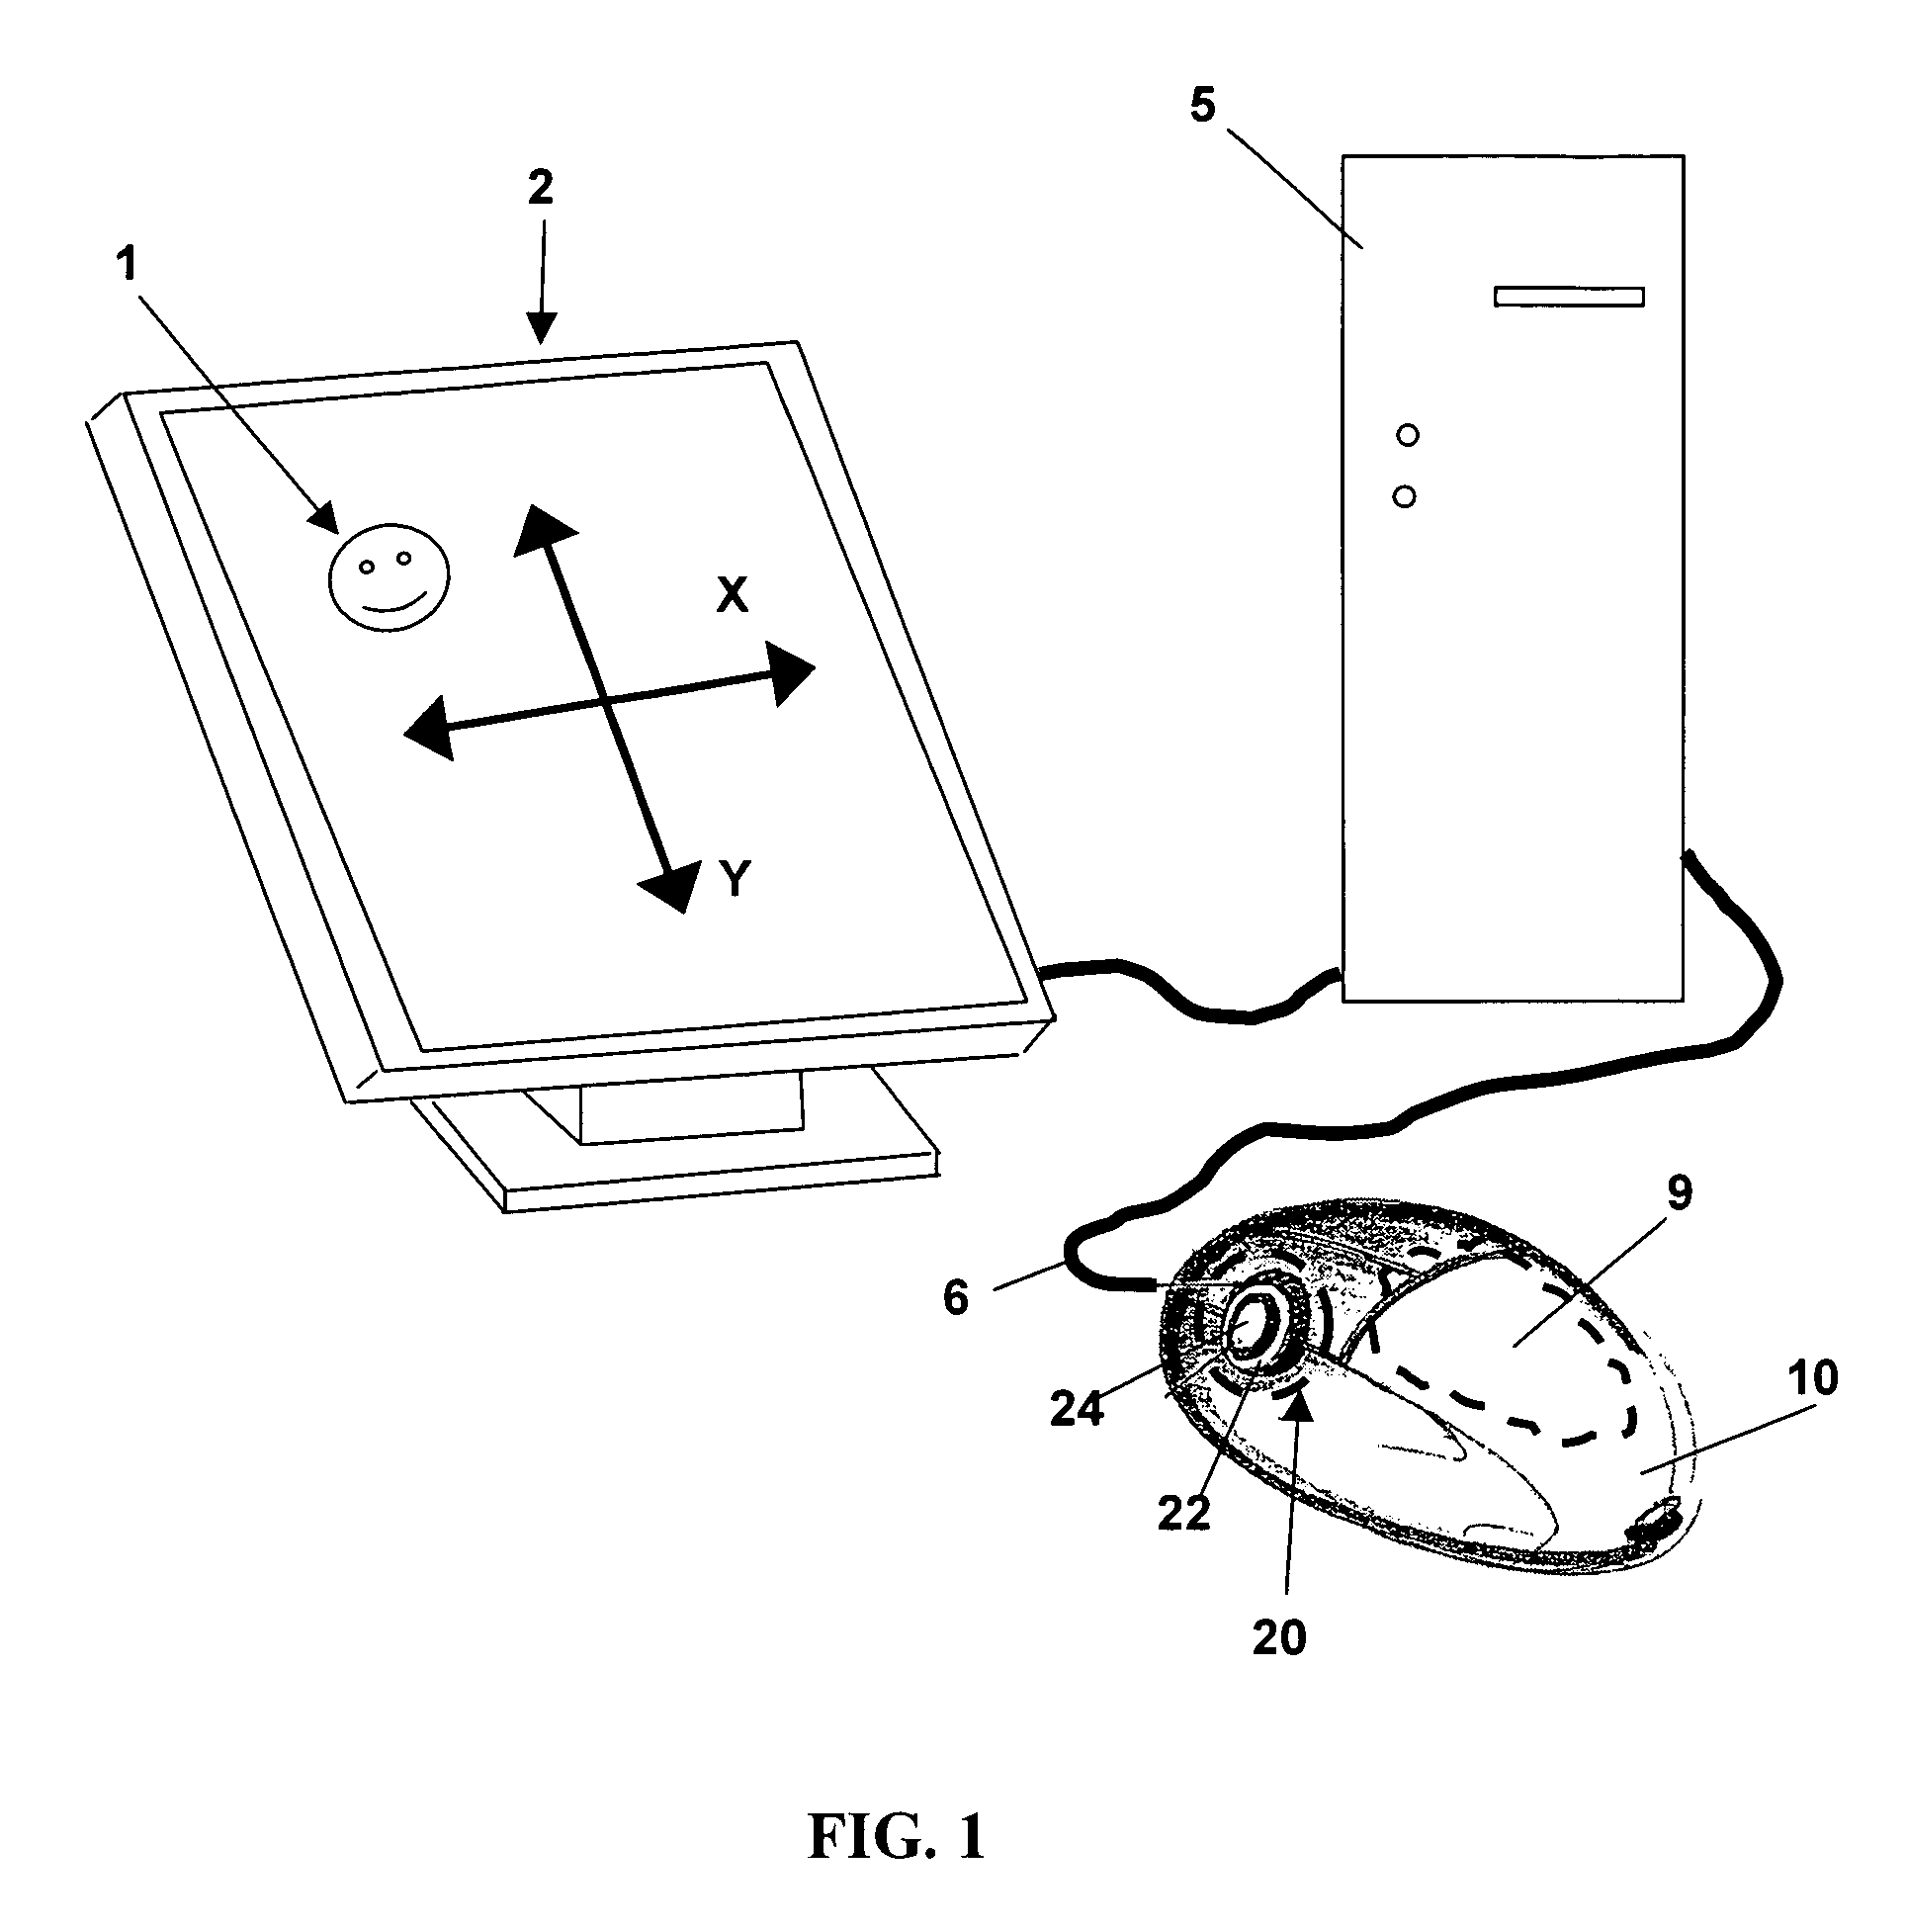 Input device including a scroll wheel assembly for manipulating an image in multiple directions